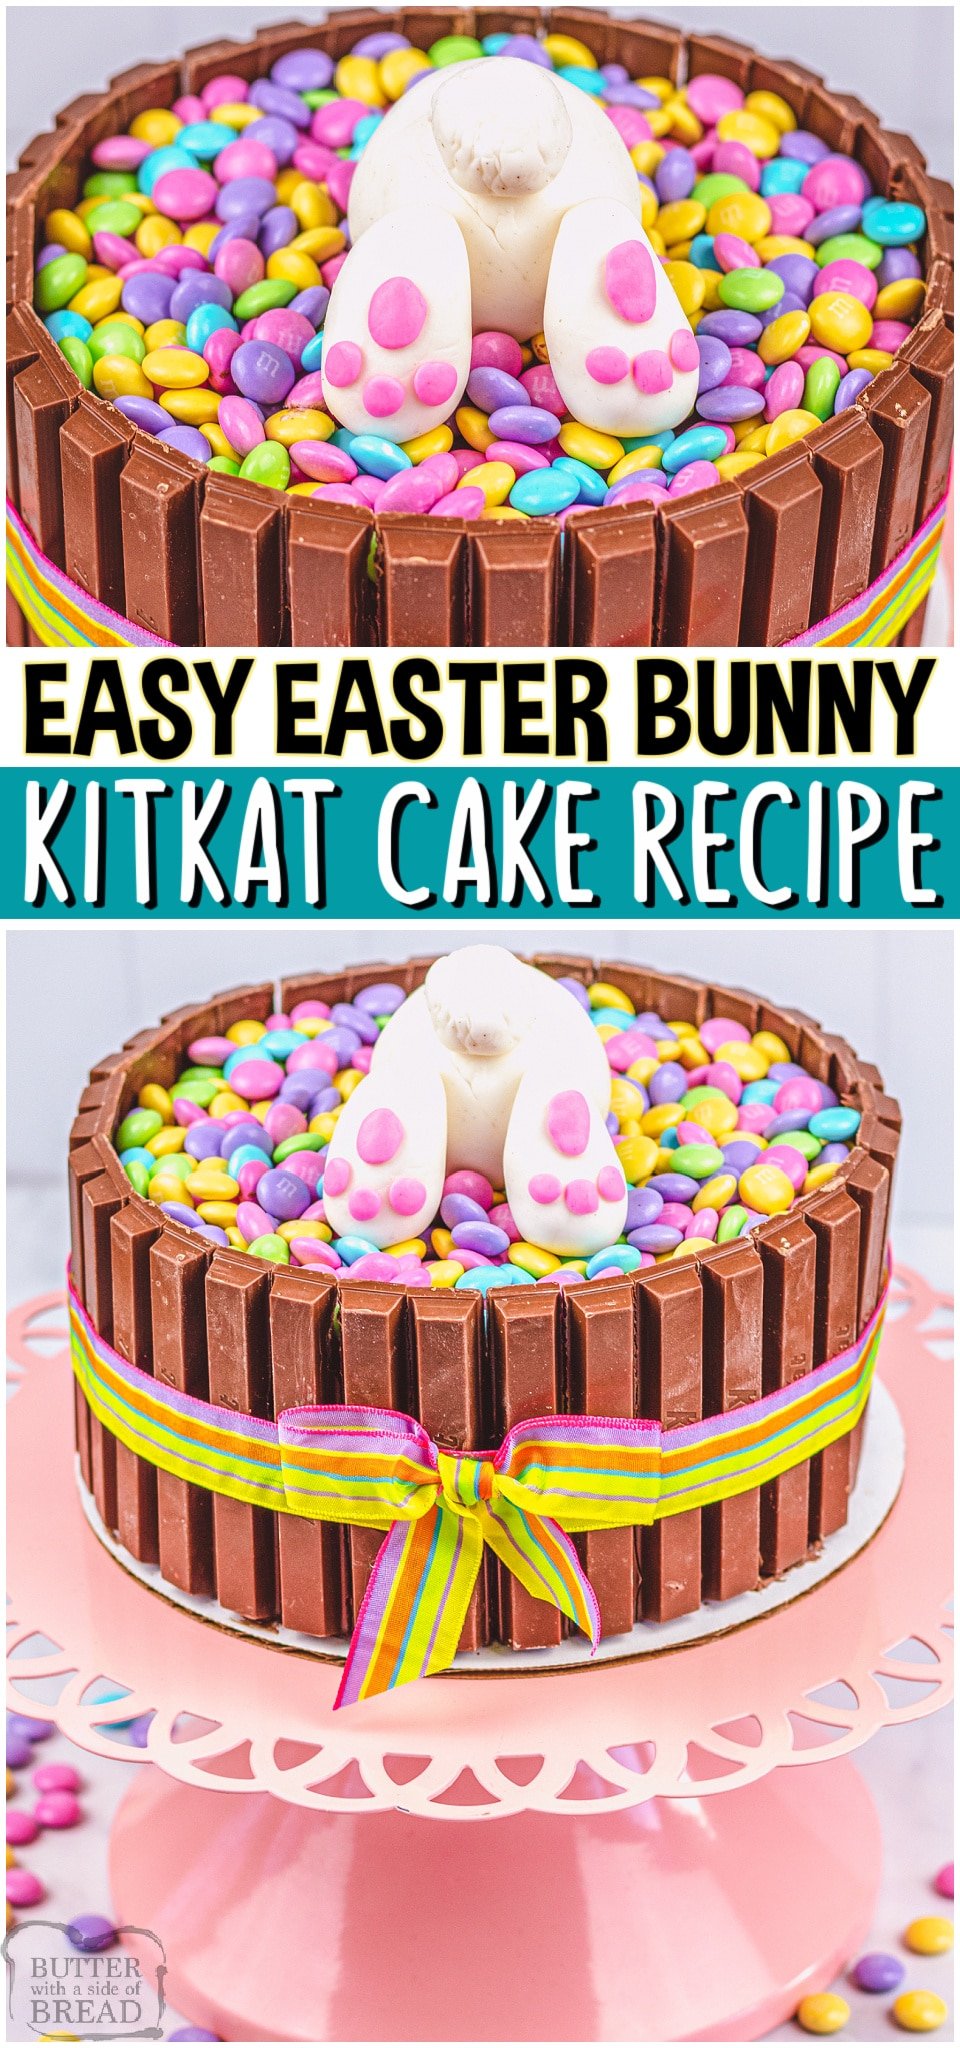 Easter Bunny KitKat Cake made easy & no one can resist this darling Easter cake! KitKats line the outside of the cake and the top has a cute Easter Bunny peeking out of pastel M&M candies. #Easter #cake #KitKat #EasterBunny #easycake #easyrecipe from BUTTER WITH A SIDE OF BREAD